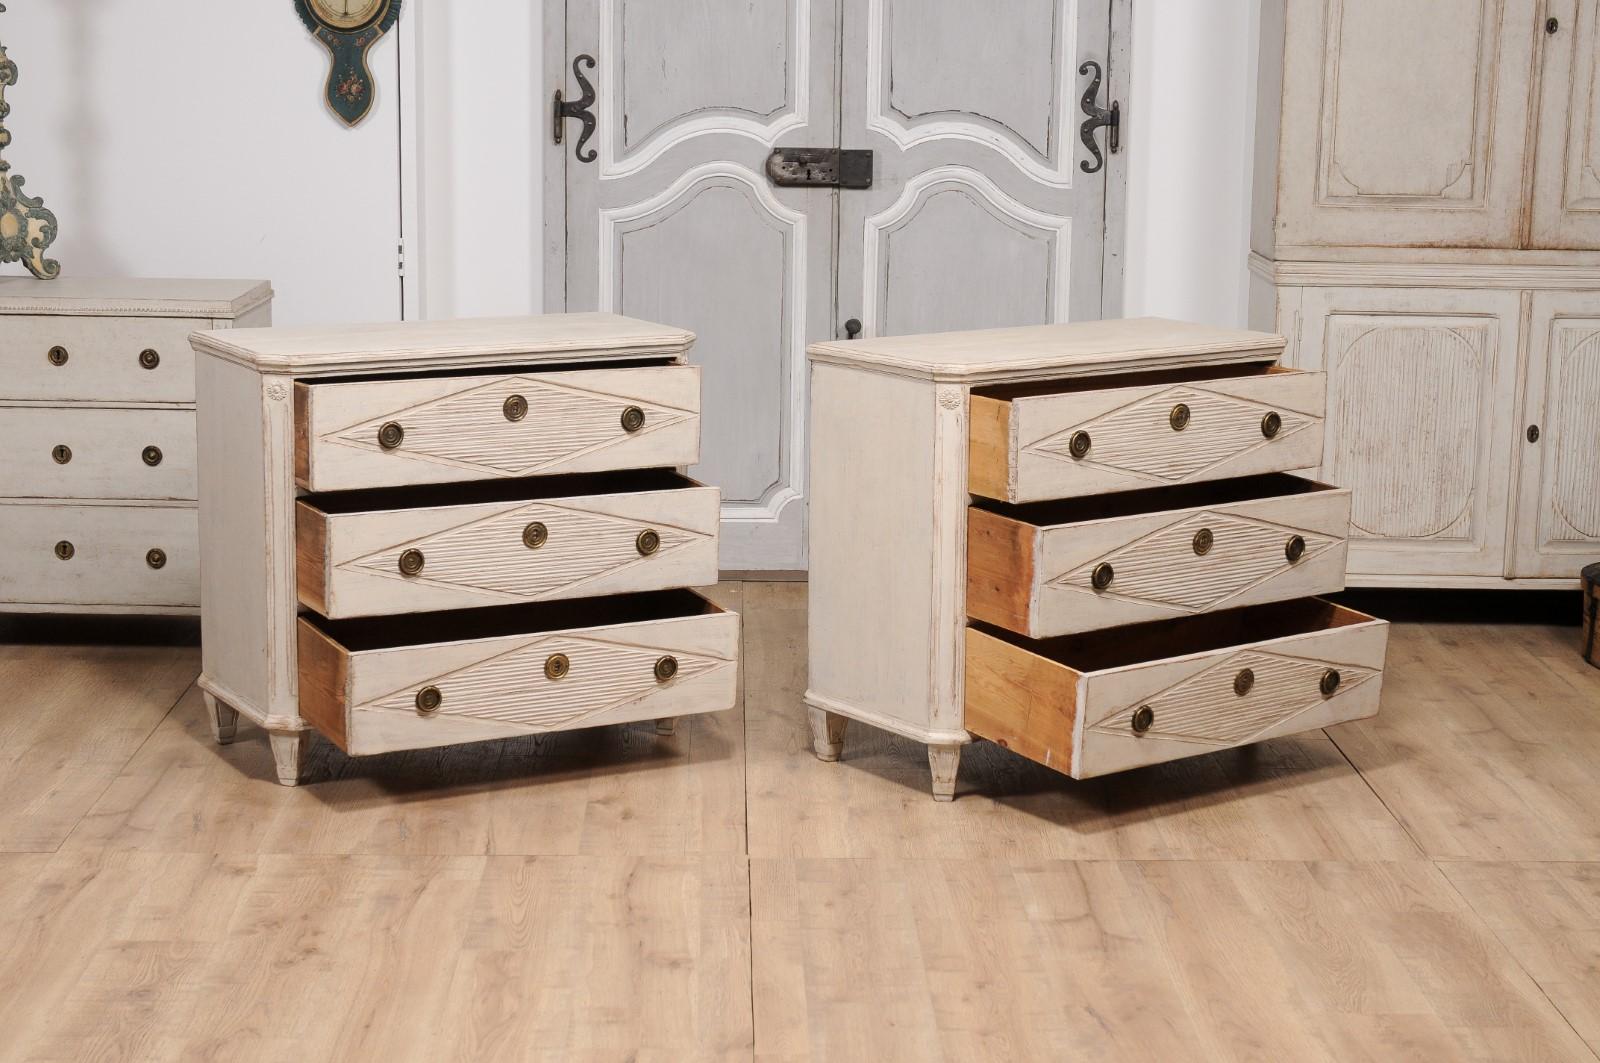 Brass Gustavian Style 19th Century Painted Chests with Carved Diamond Motifs, a Pair For Sale